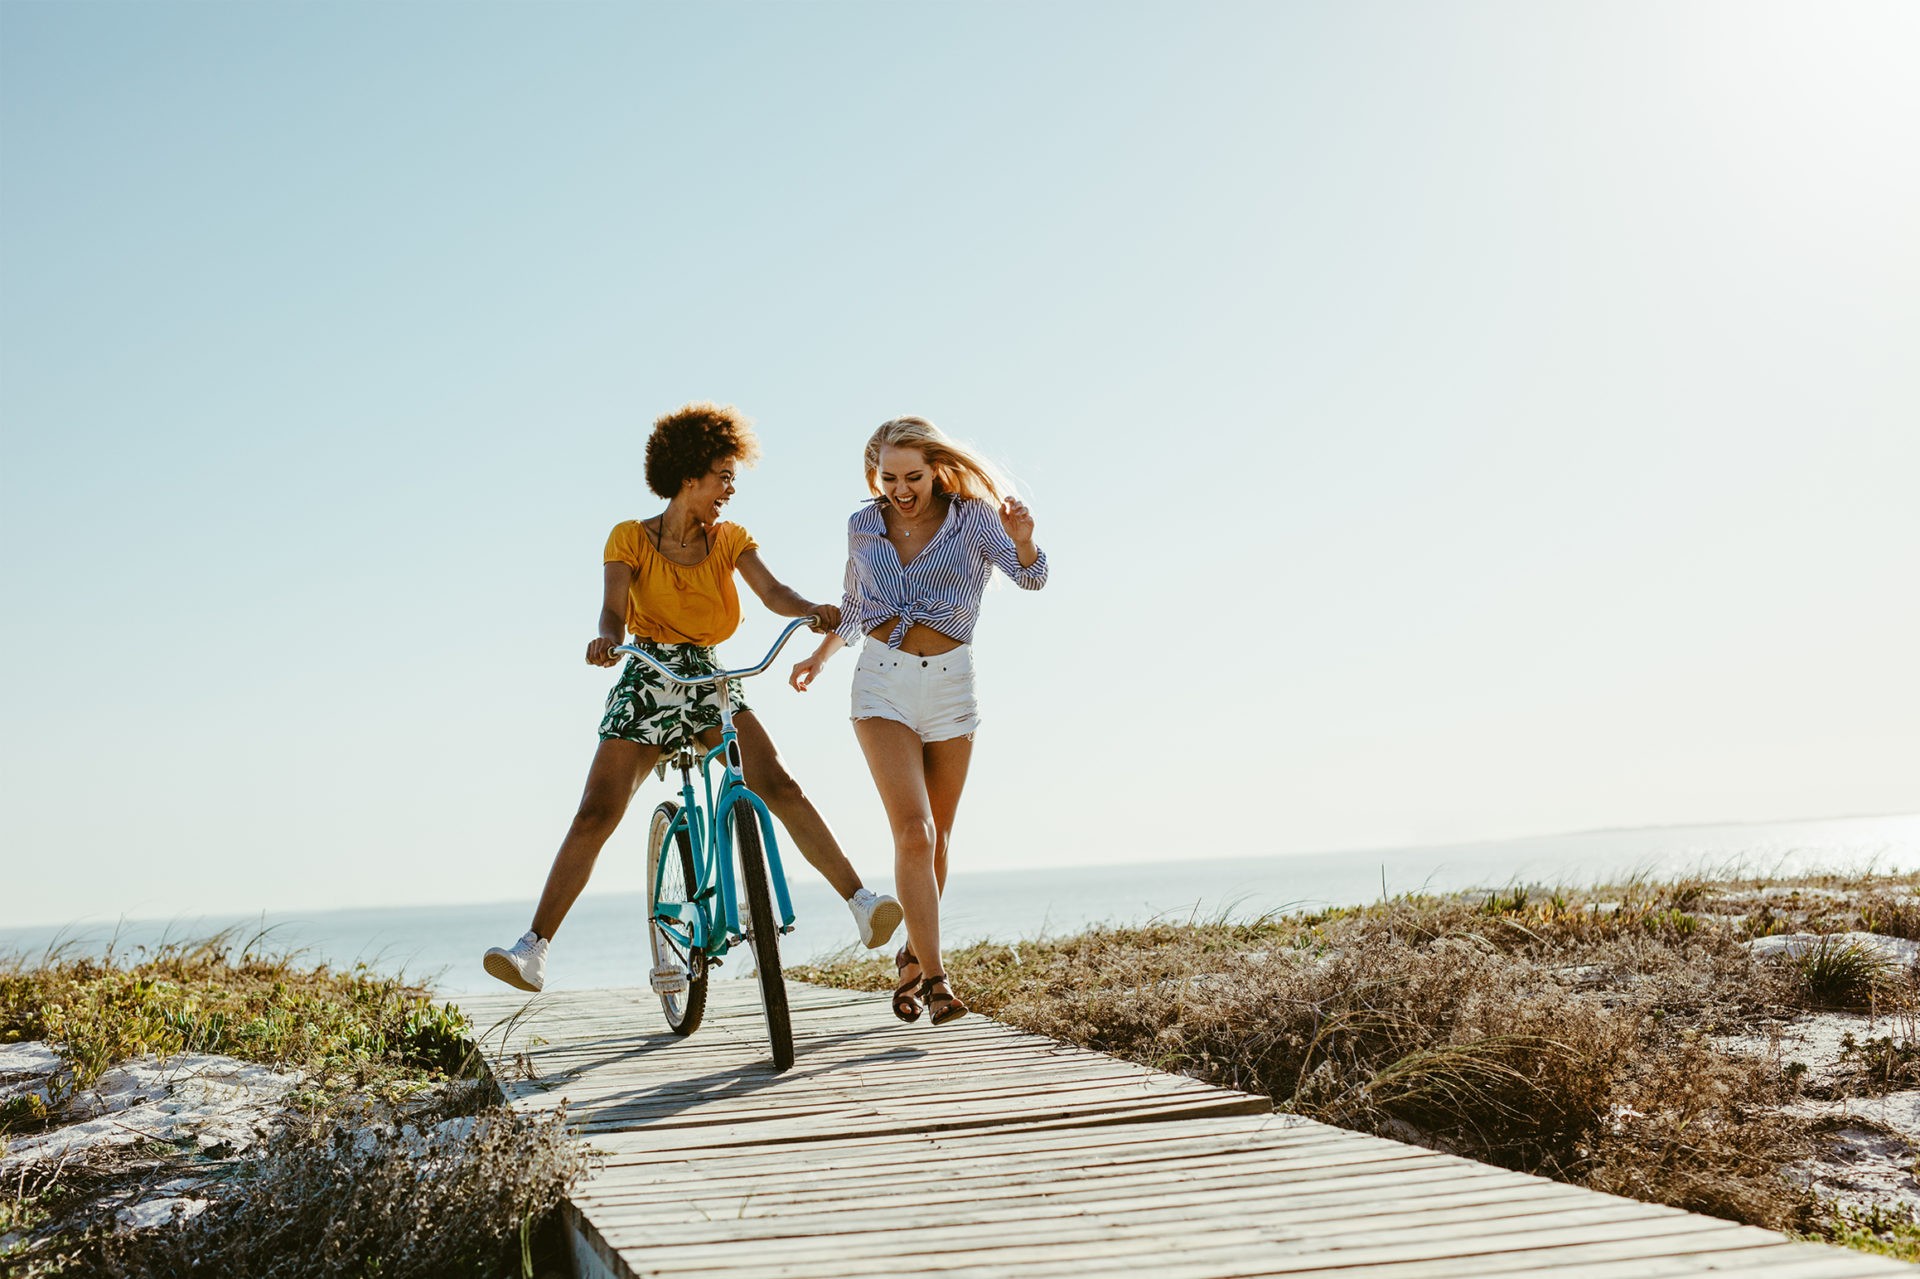 Two girls riding a bike and running at the beach.